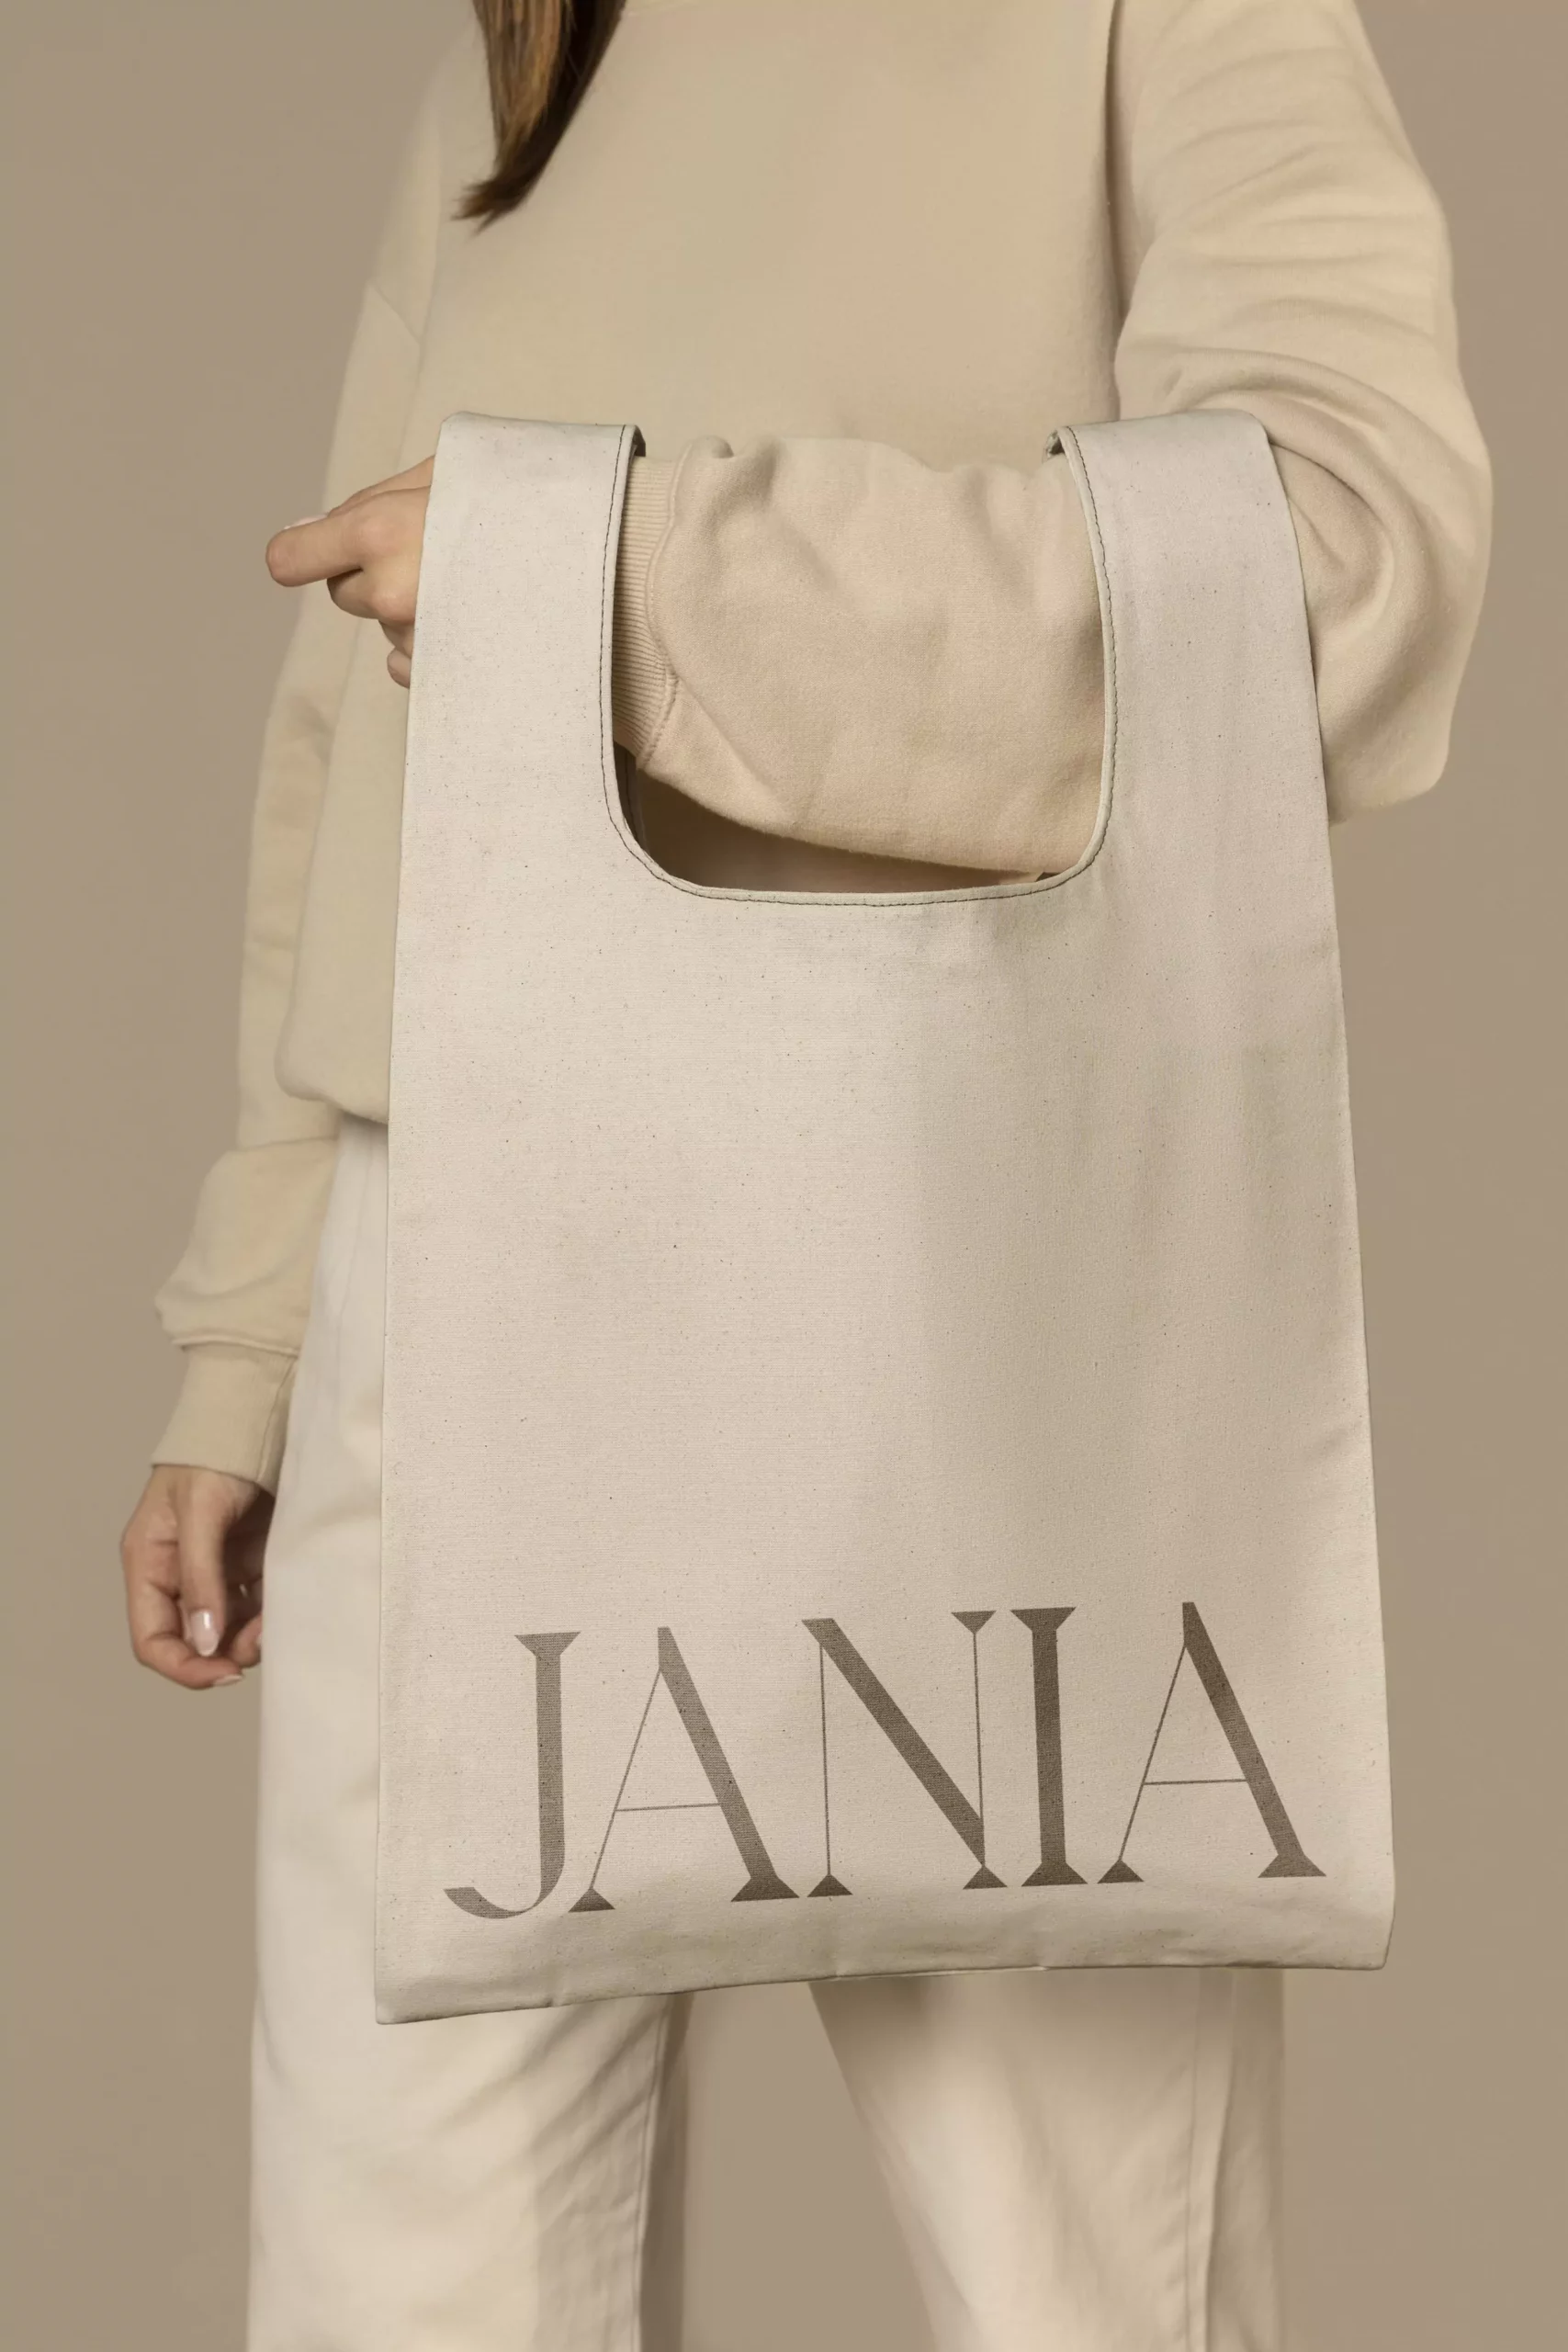 Brand Identity for Jania - Tote Bag